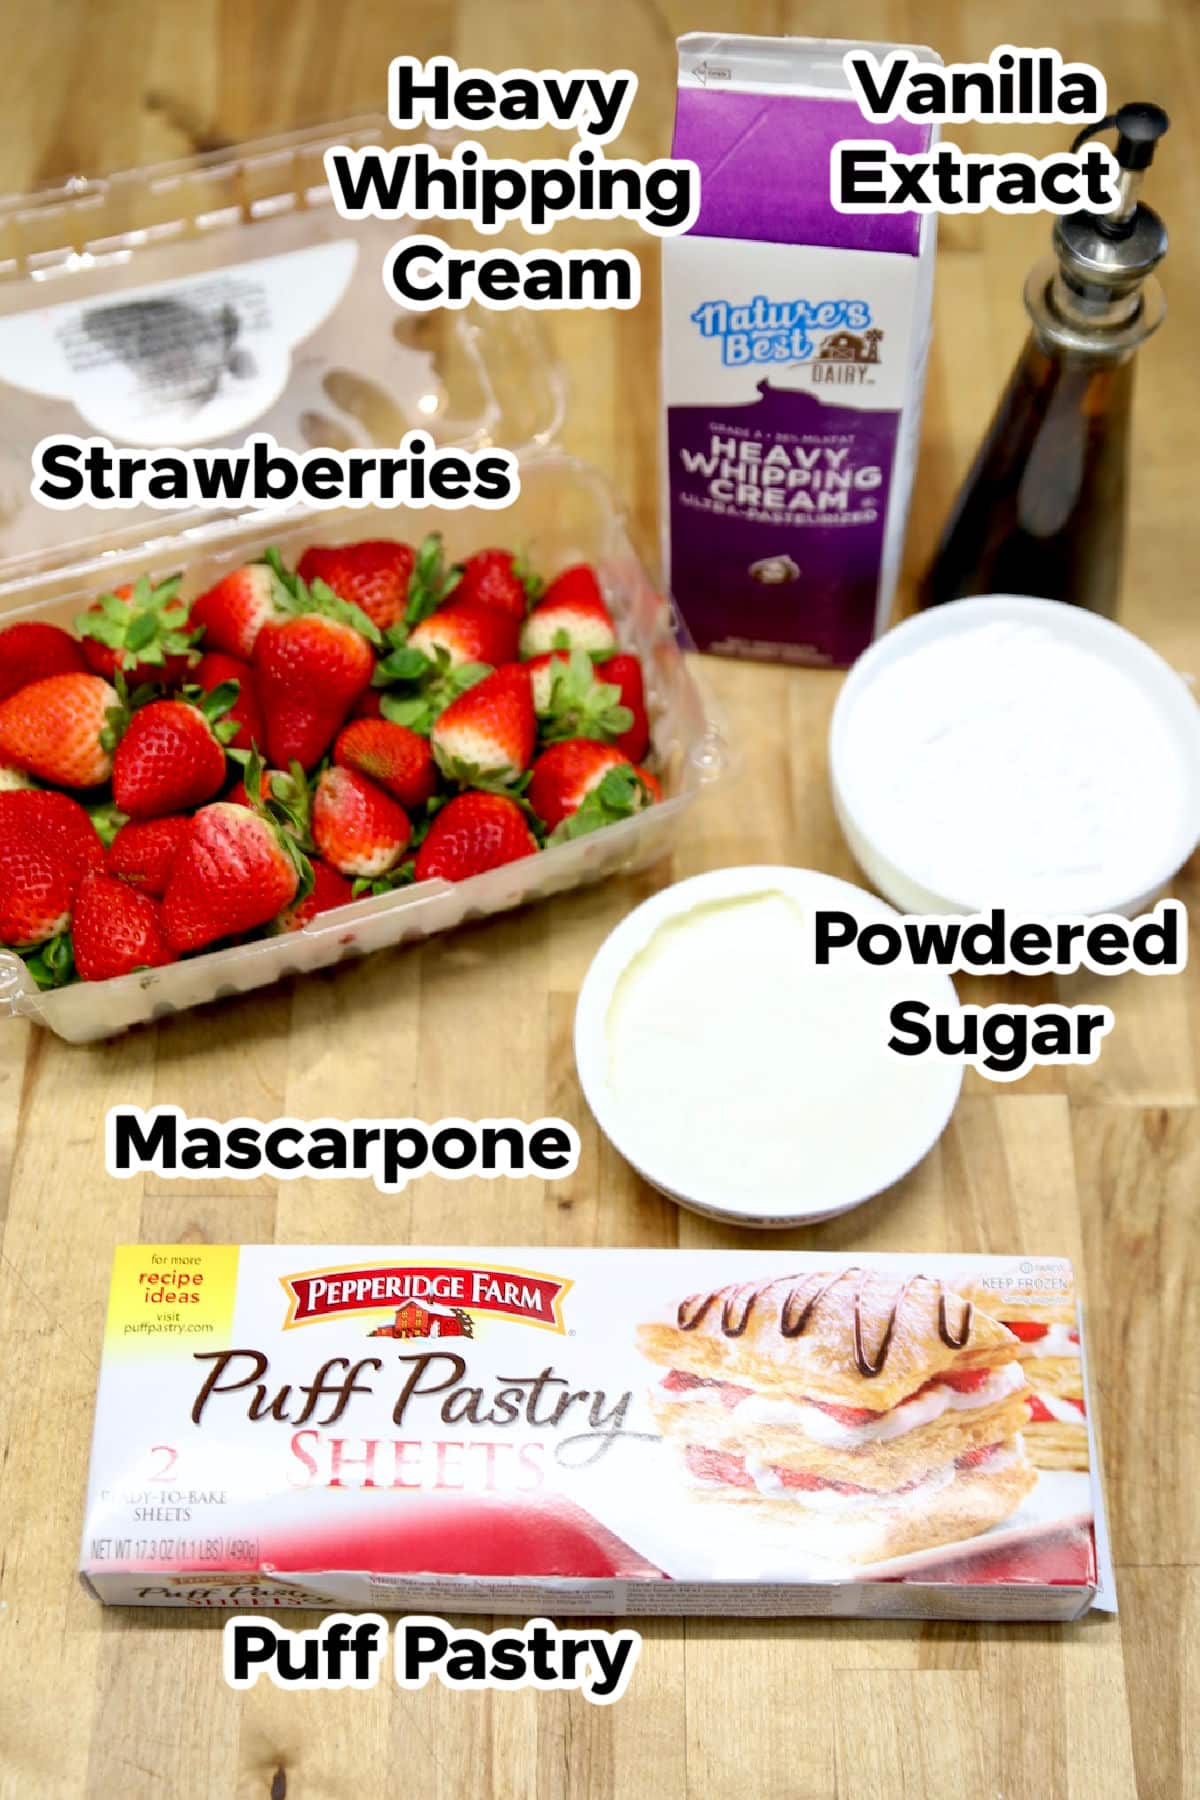 Ingredients for Napoleon pastries with strawberries.